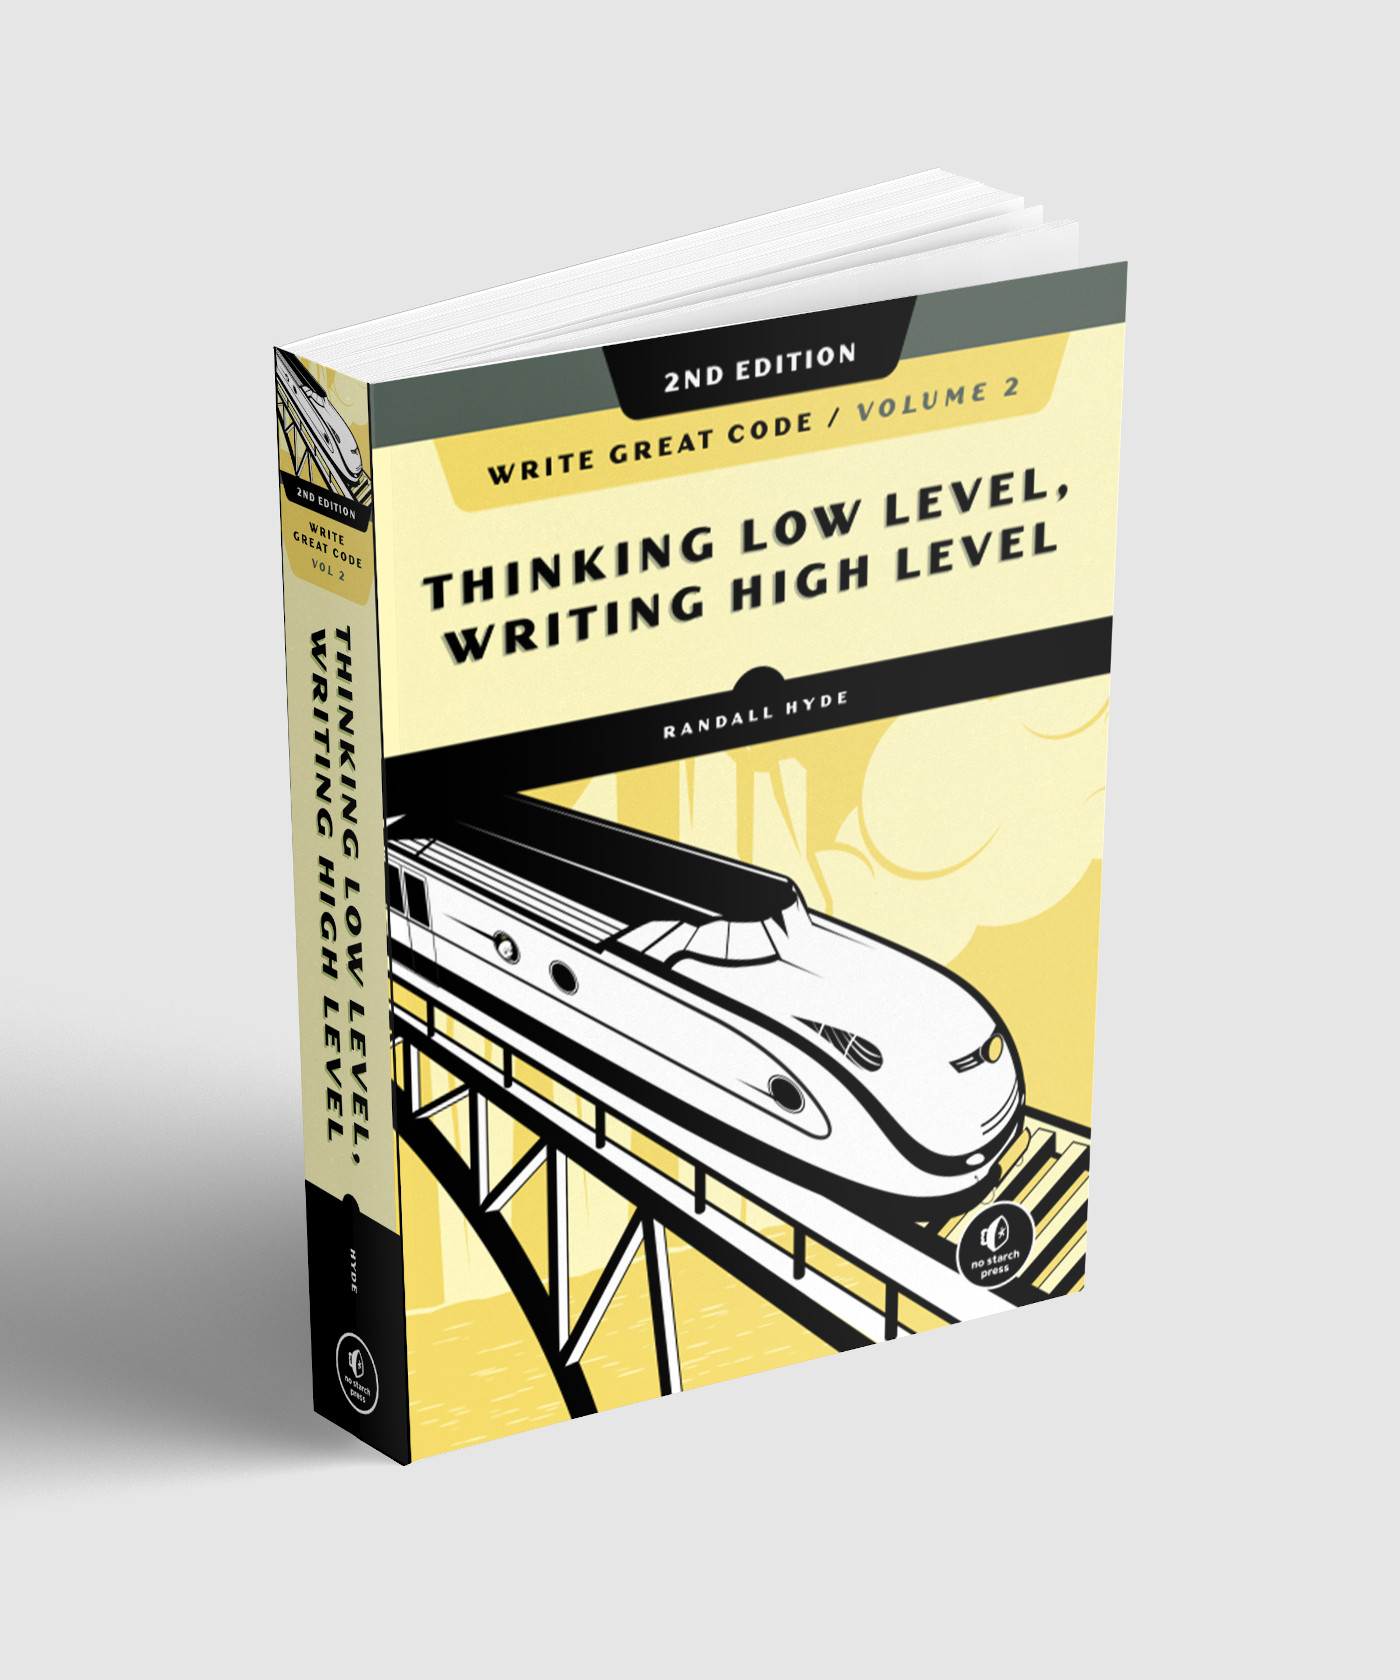 Writing High-Level 2nd Edition: Thinking Low-Level Write Great Code Volume 2 